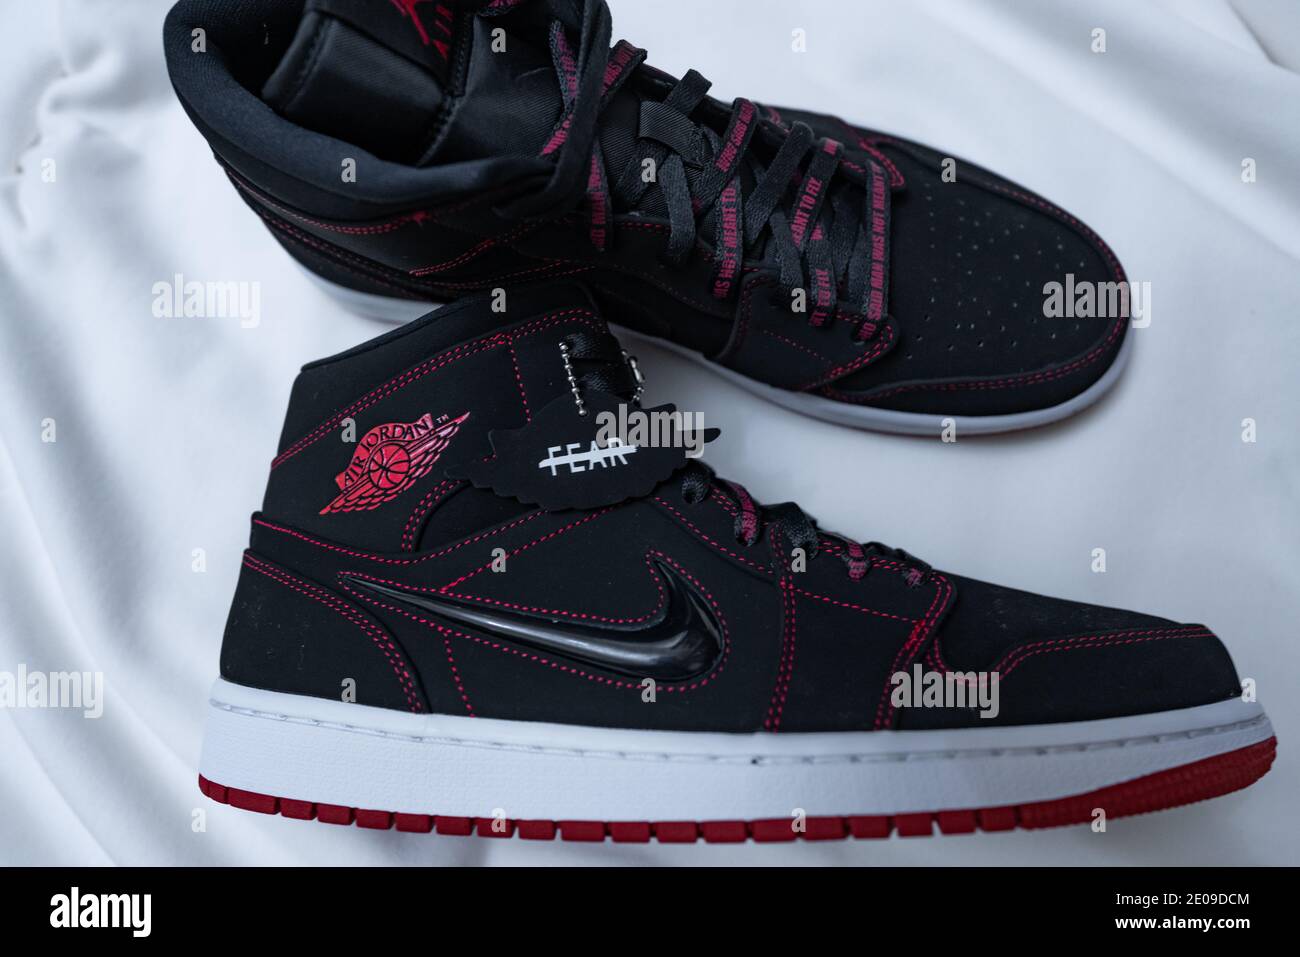 Red, Black and white Nike Jordan 1 | 23 basketball sneakers culture, red  stitches | Michael Jordan, Chicago Bulls Stock Photo - Alamy